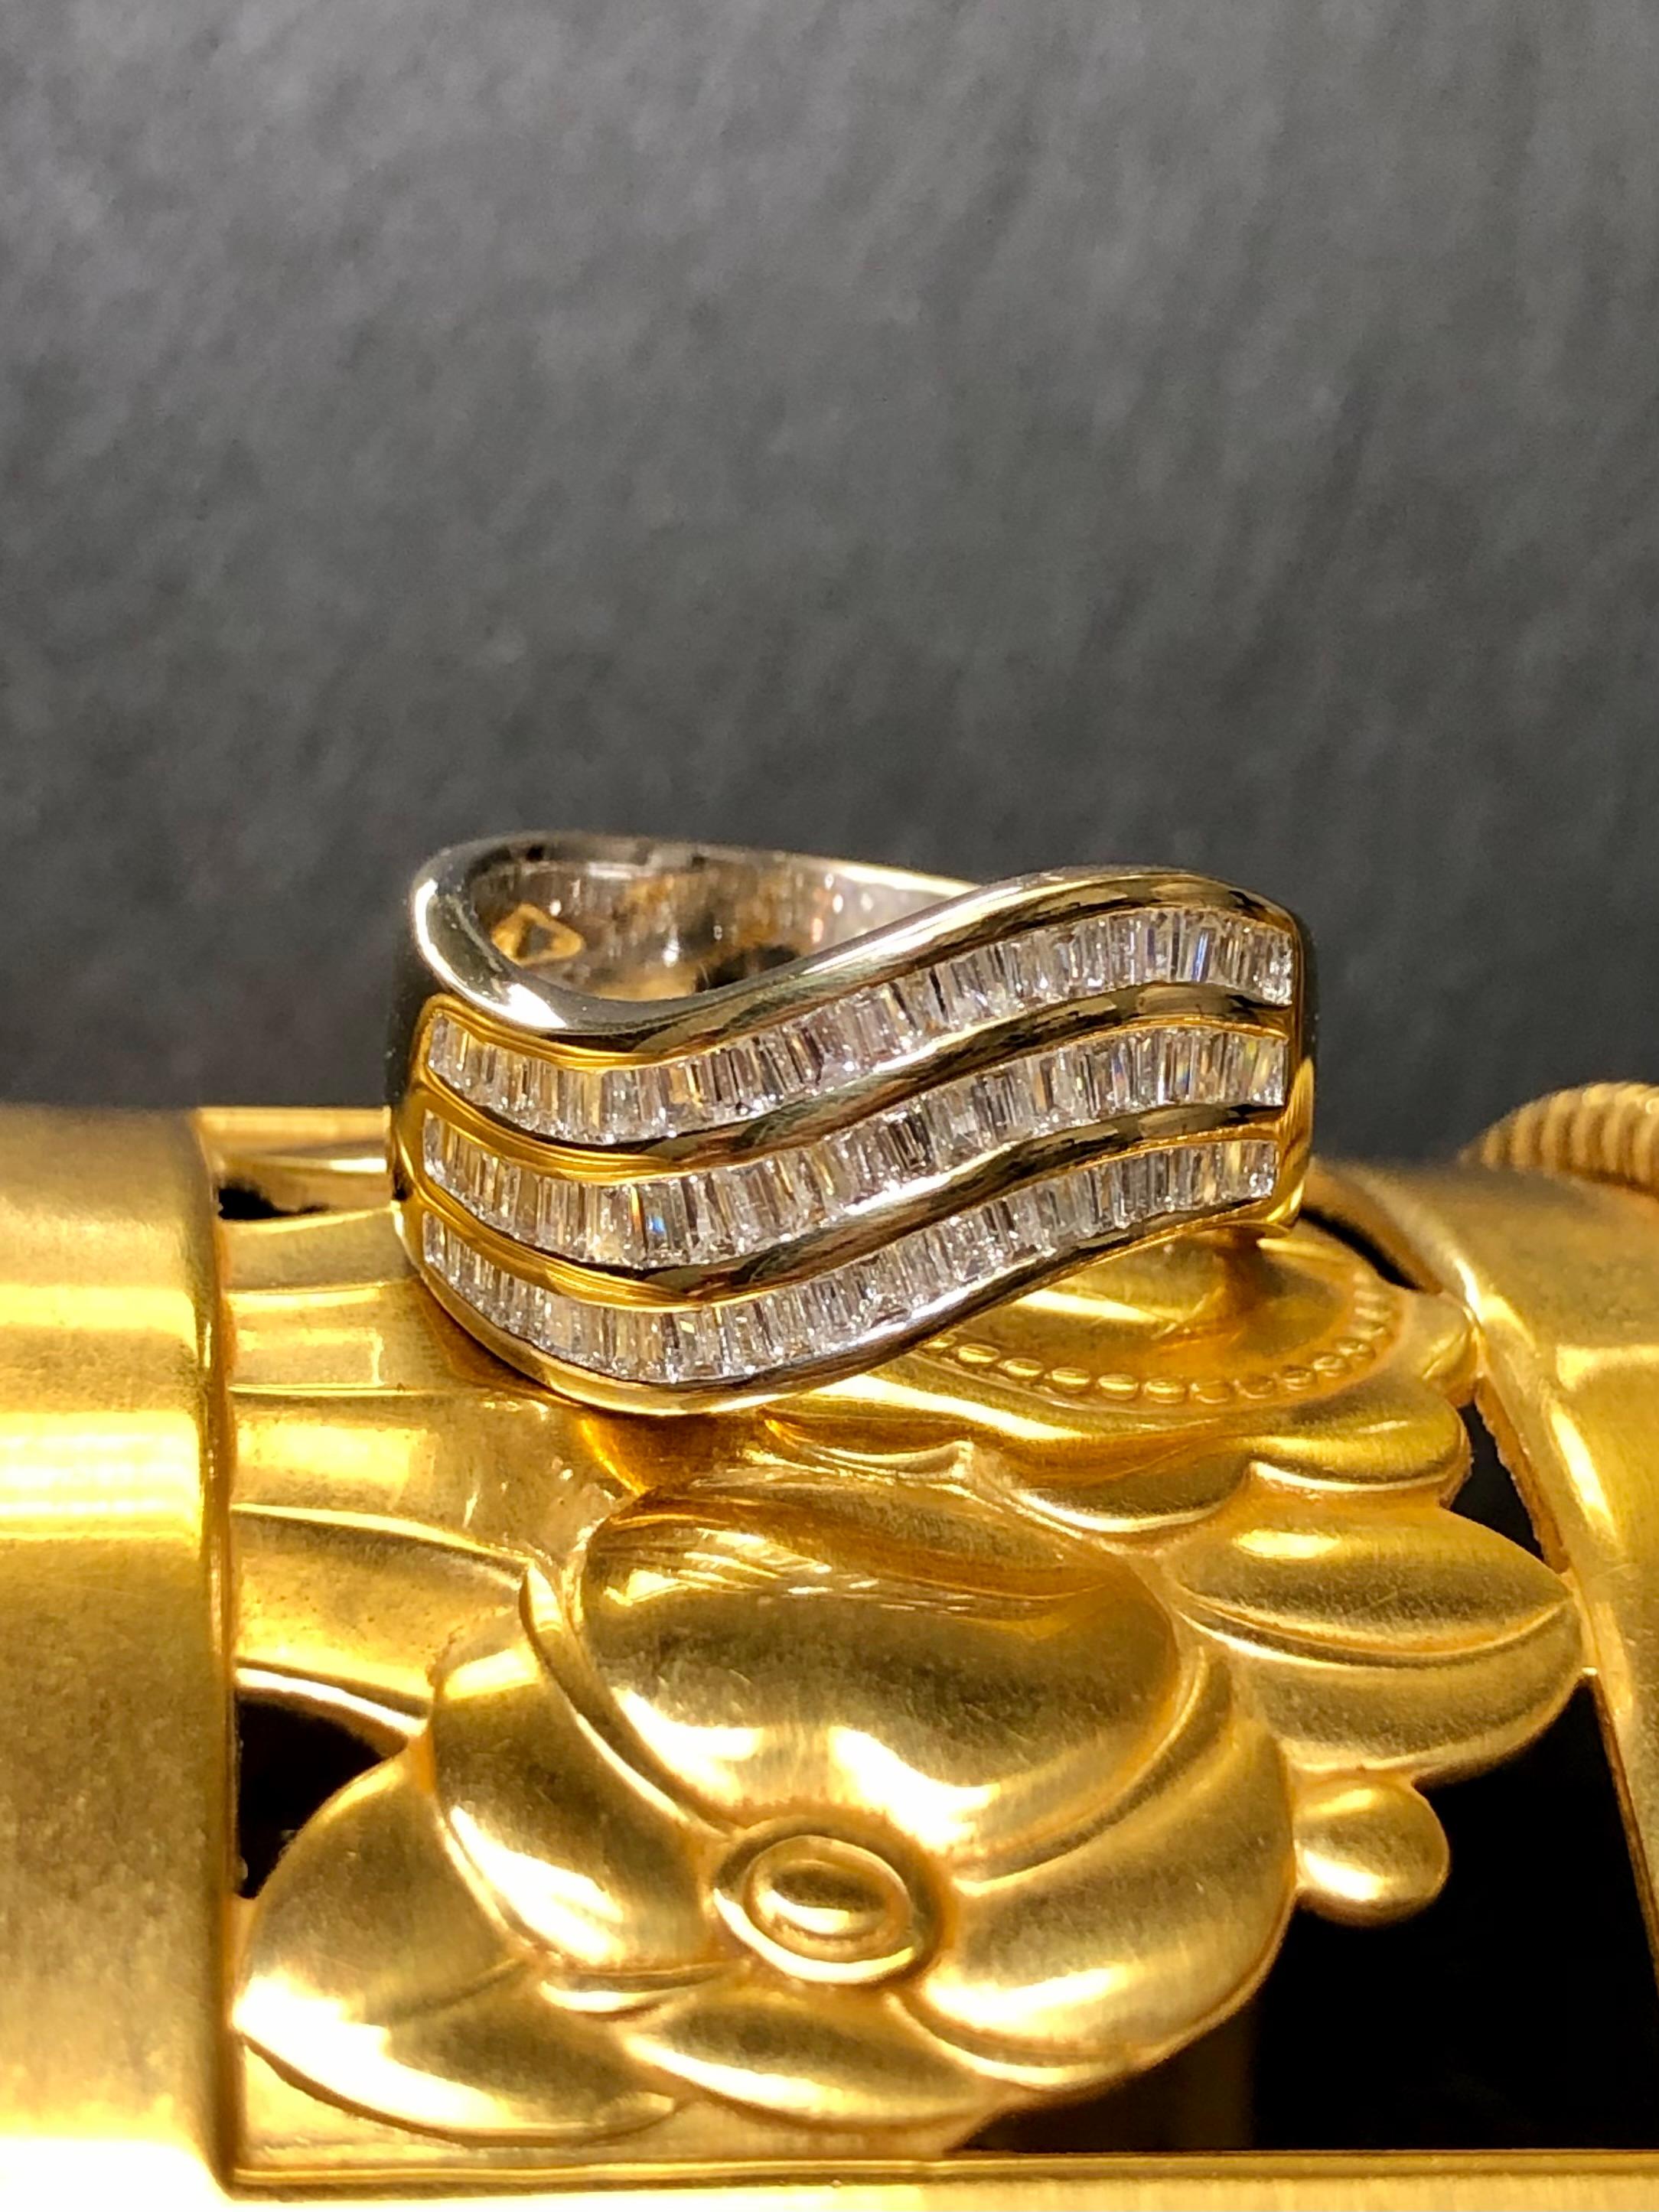 A classic band ring done in 18K yellow gold (interior of band is white gold not plated) channel set with approximately 1.60cttw in baguette diamonds being G/H color and si1/2 in clarity. A gorgeous classic look.


Dimensions/Weight:

Ring measures